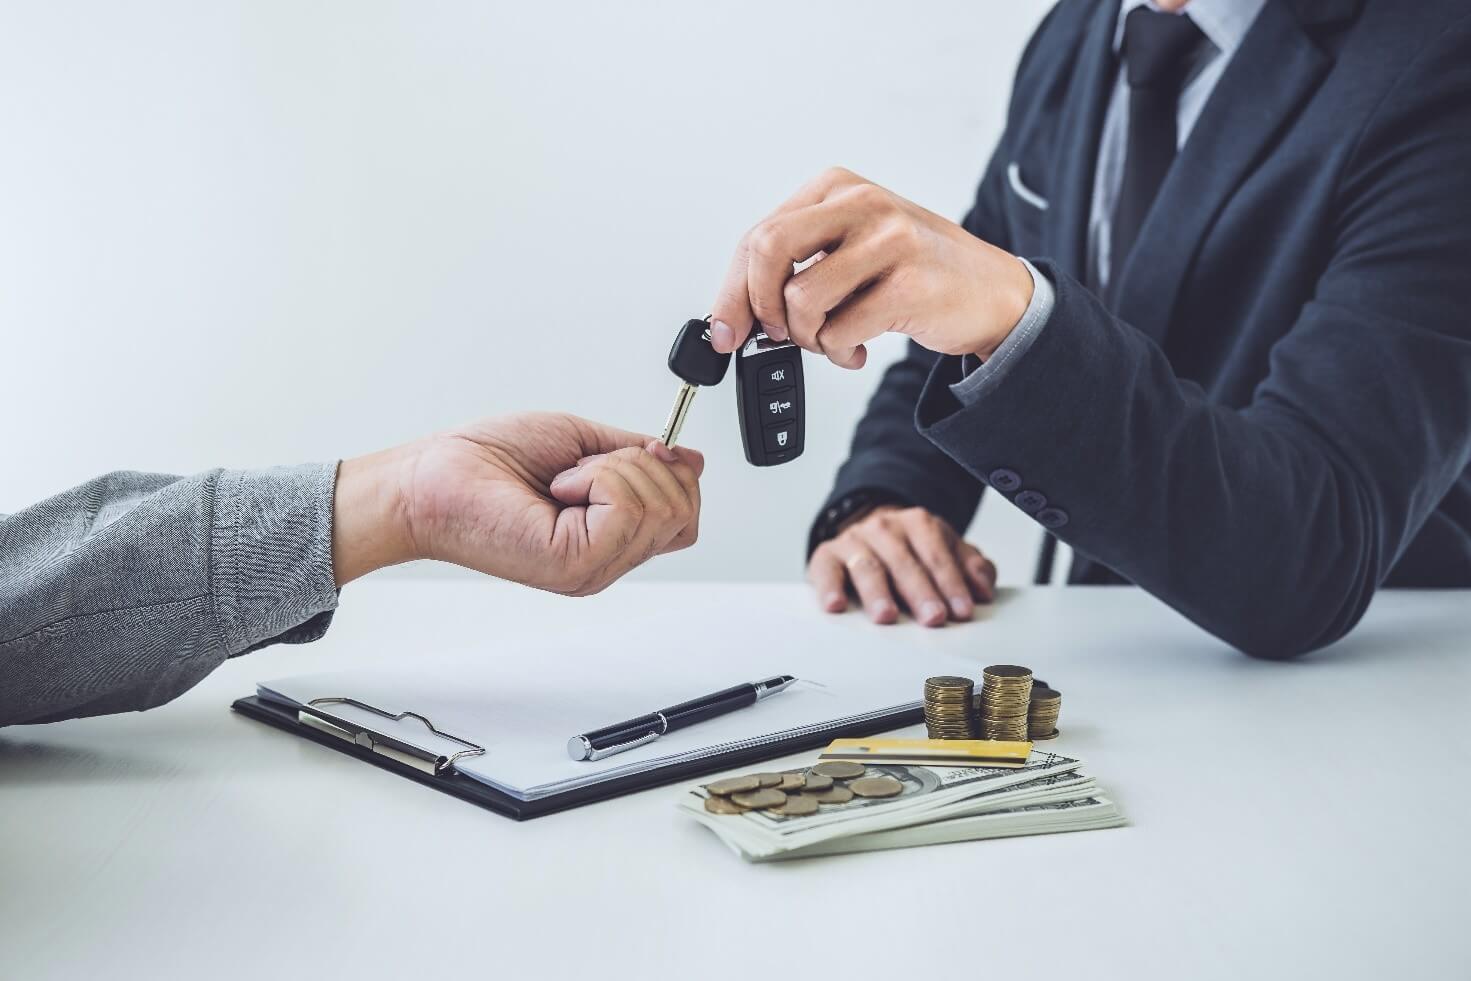 Man giving car keys to another man after a transaction